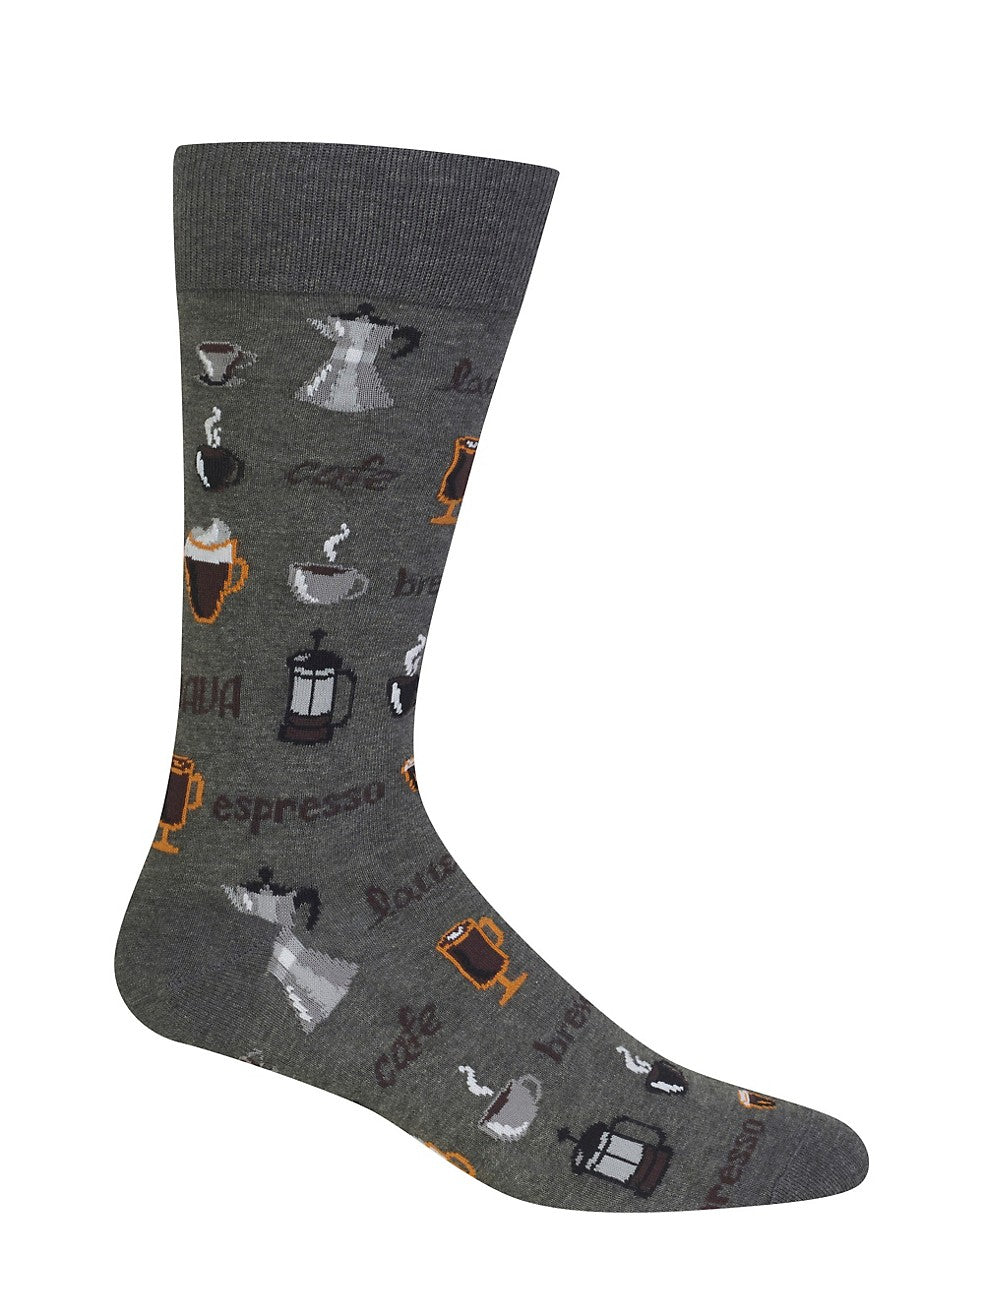 "Coffee" Cotton Crew Socks by Hot Sox - Large